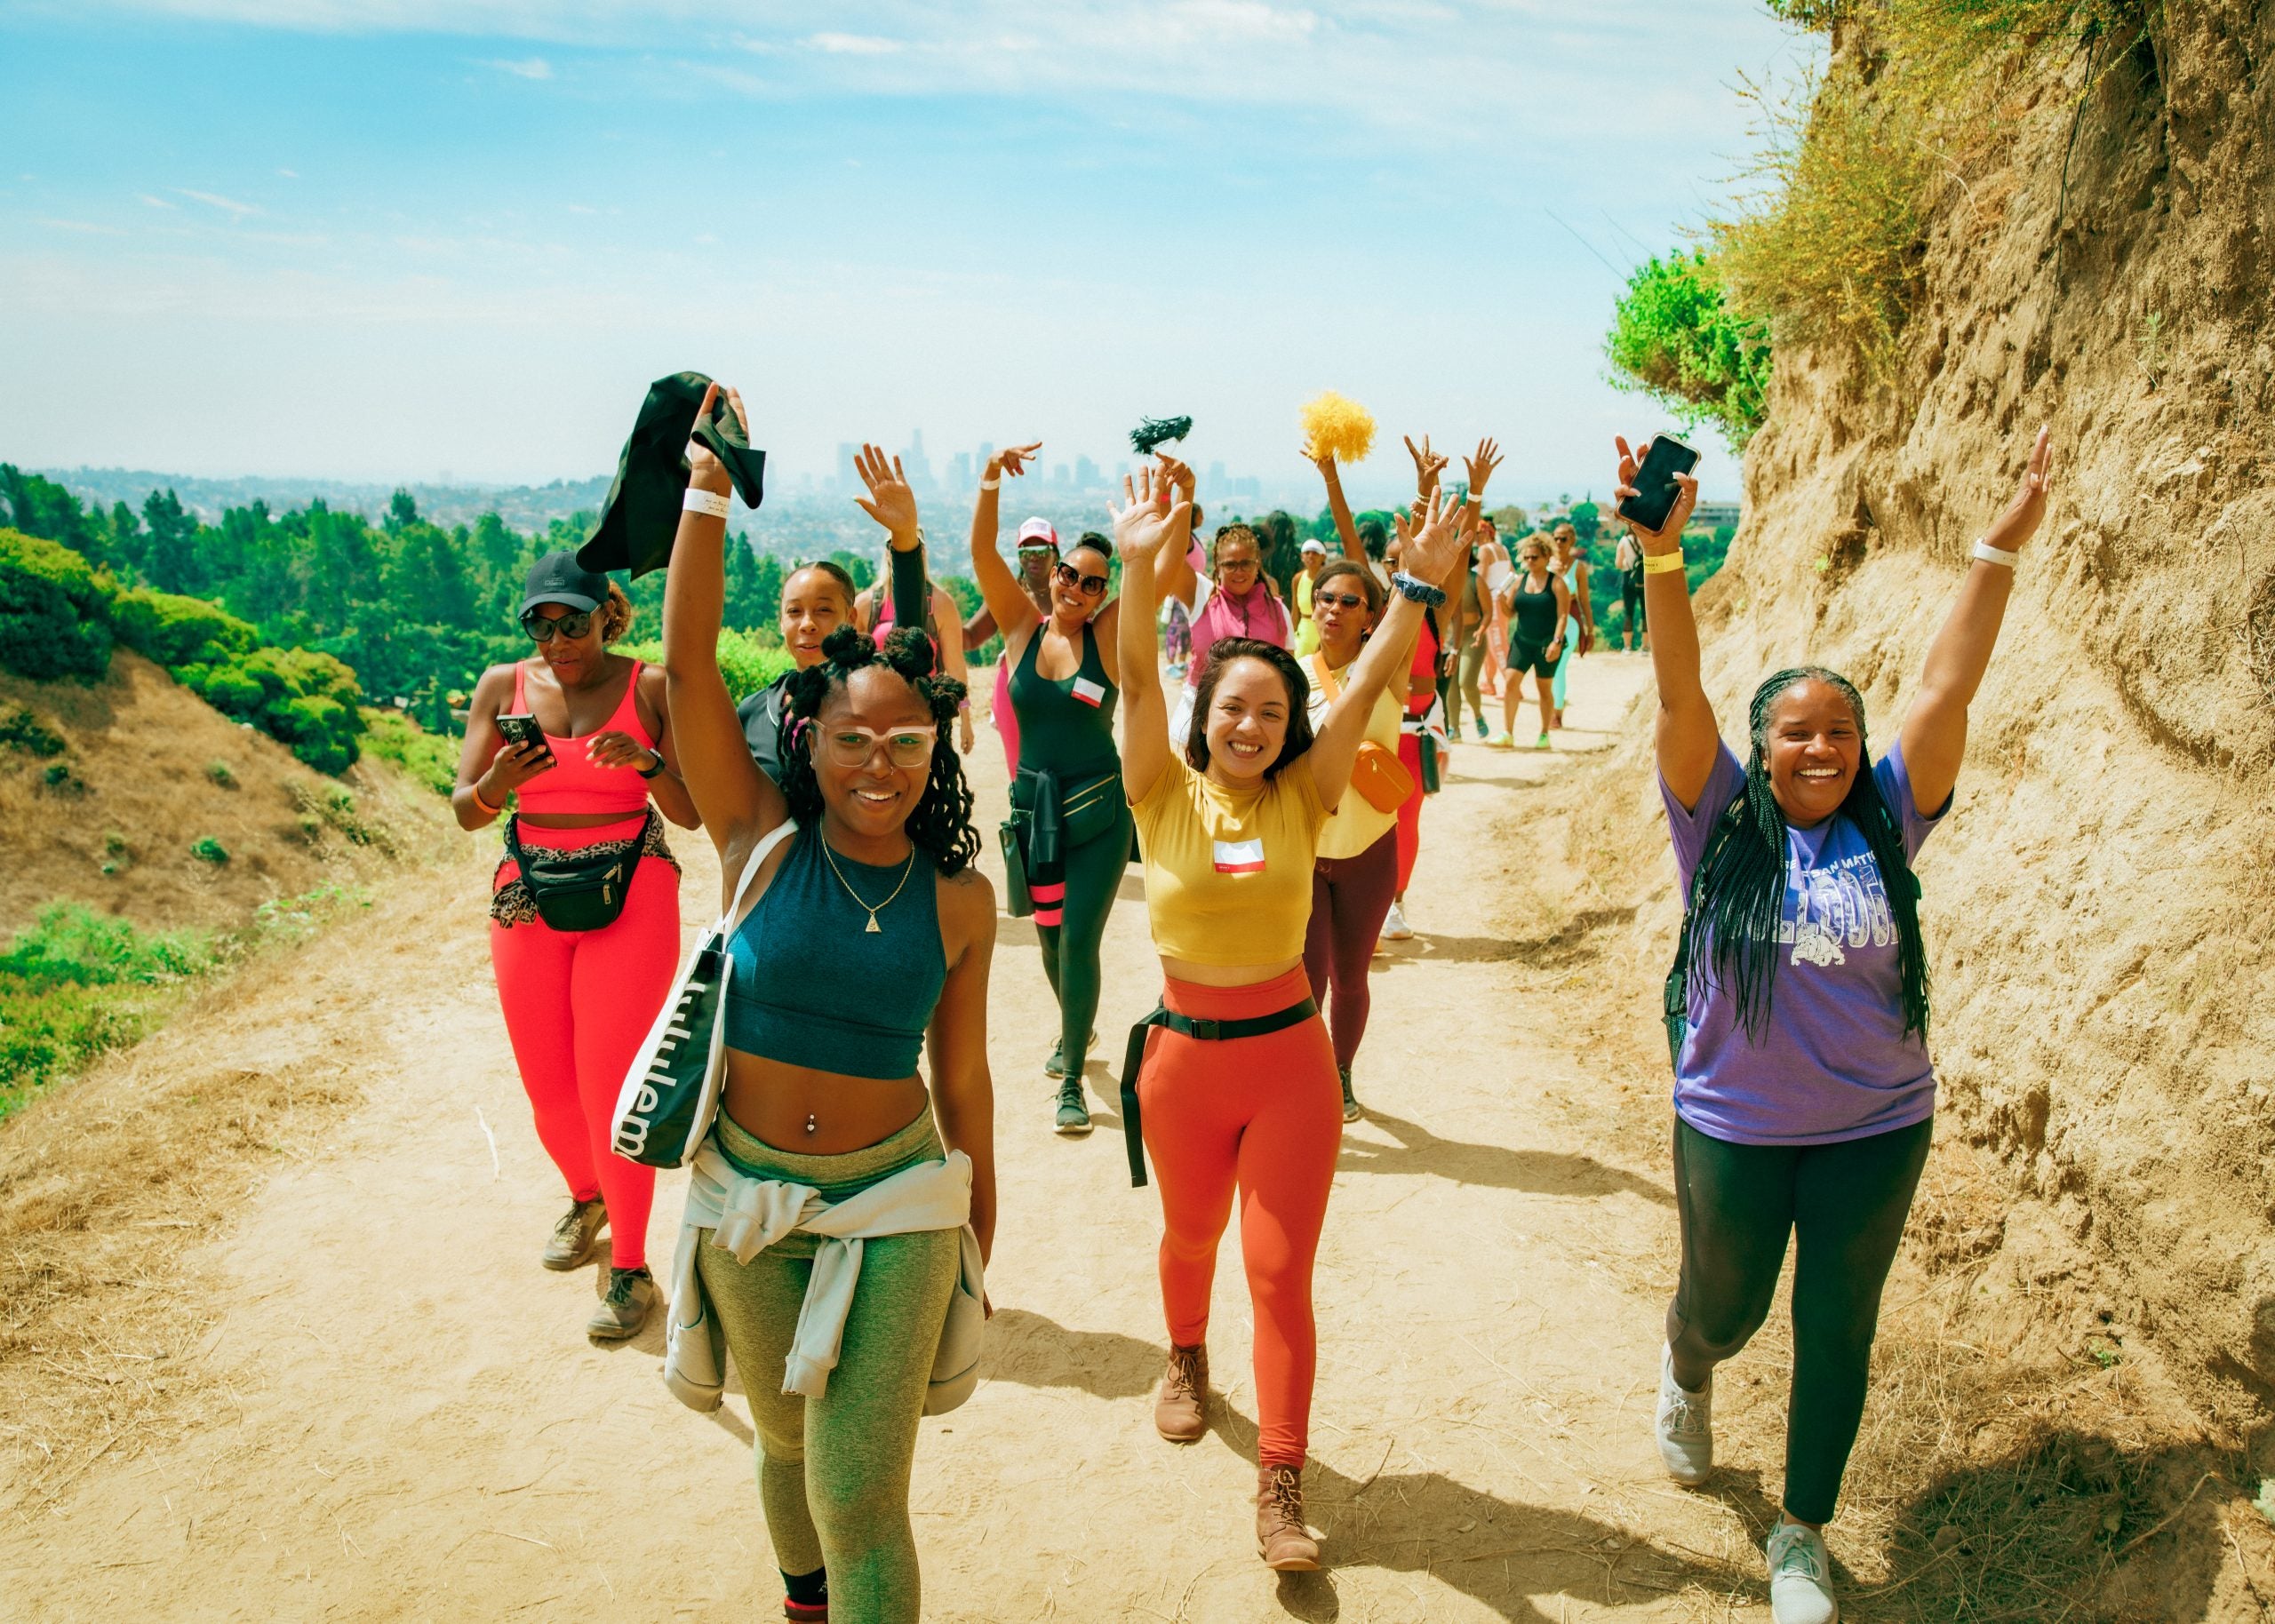 200+ Black Women Joined The Morning Mindset With Tai Hike And Experience In Los Angeles During BET Awards Weekend